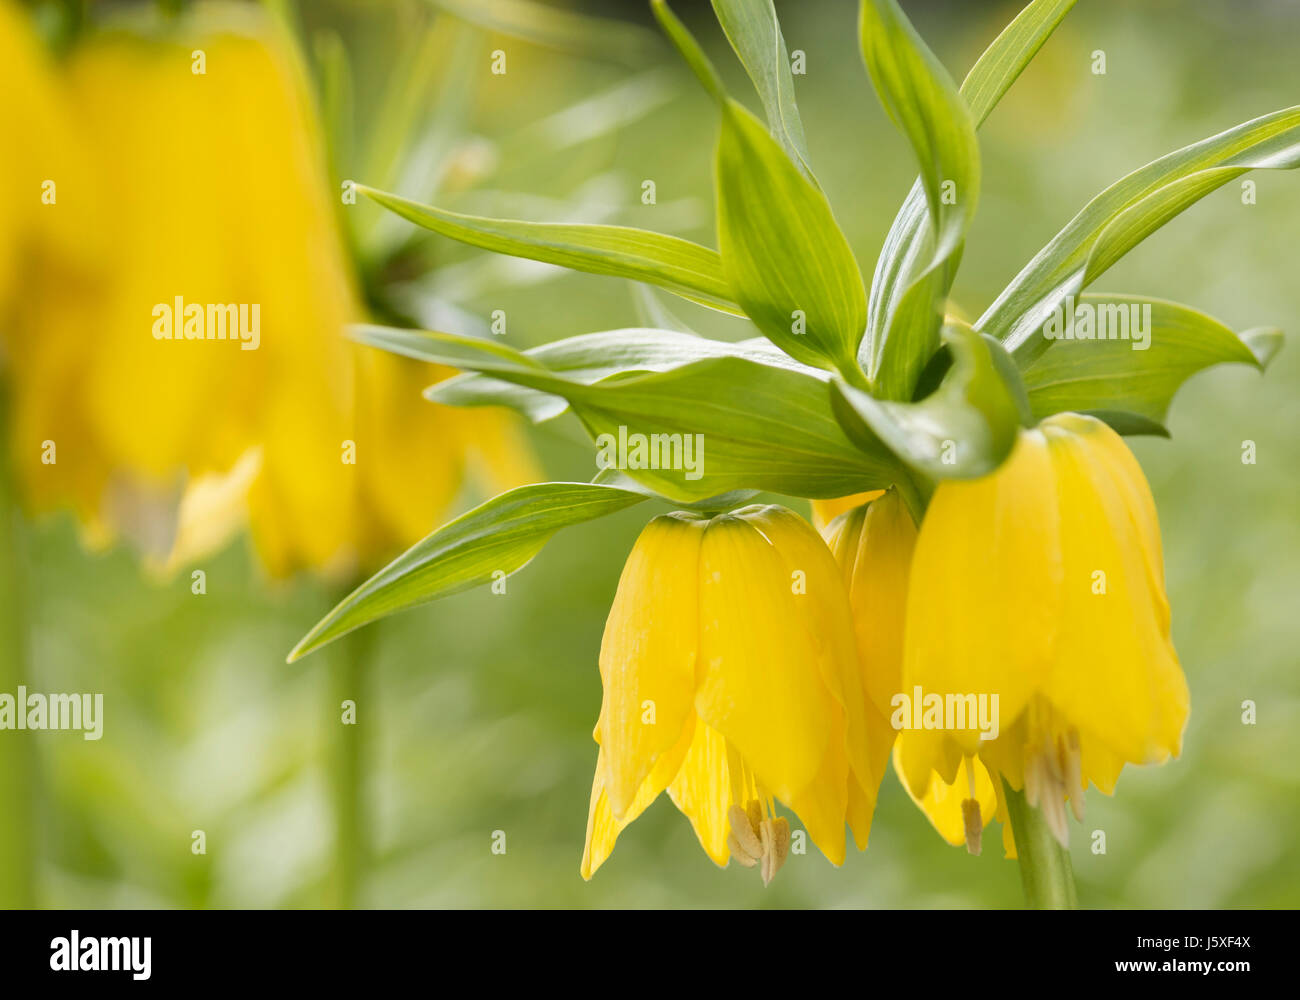 Fritillary, Crown imperial 'Maxima Lutea', Fritillaria imperialis 'Maxima Lutea', Yellow flowers growing outdoor showing stamens. Stock Photo